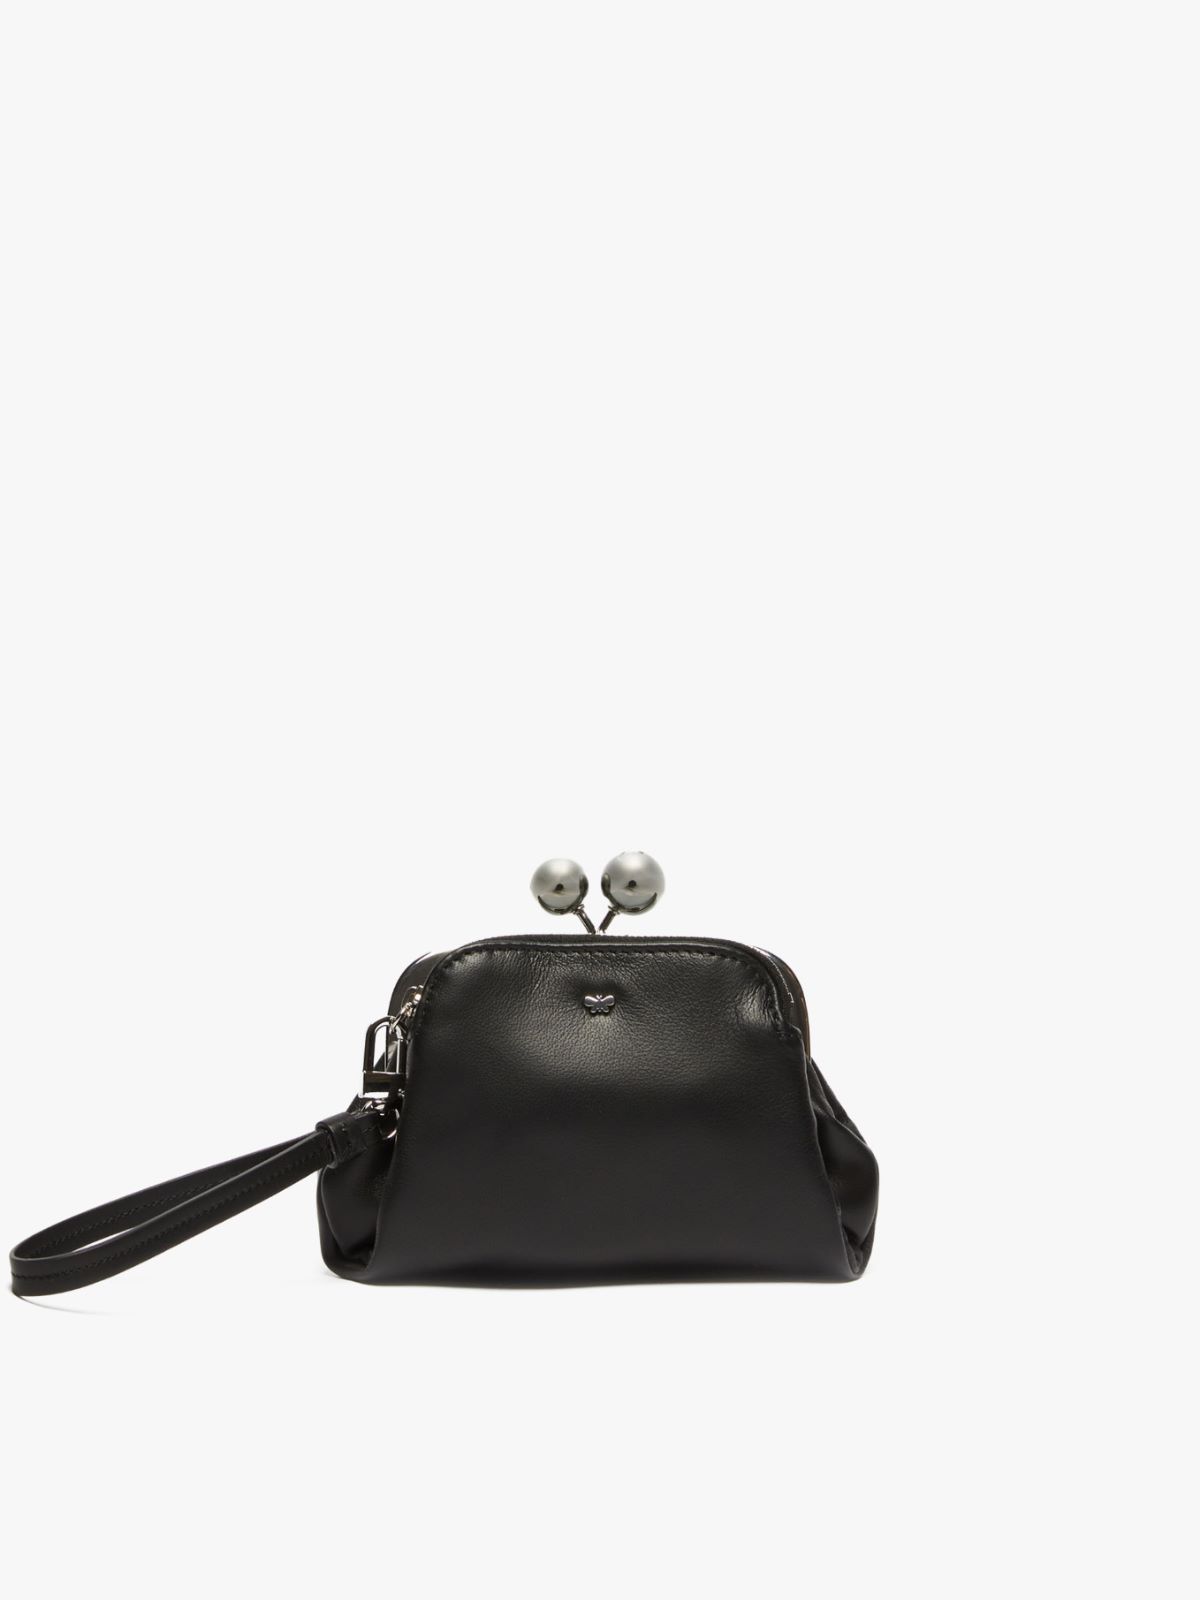 Pasticcino Bag wallet in nappa leather, black | Weekend Max Mara